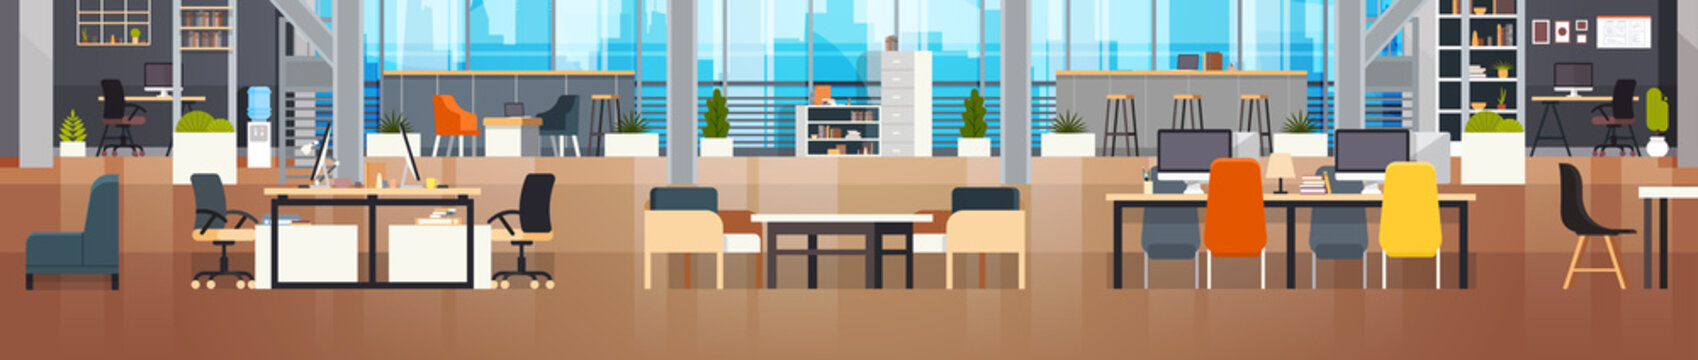 Coworking Office Interior Modern Coworking Center Creative Workplace Environment Horizontal Banner Flat Vector Illustration